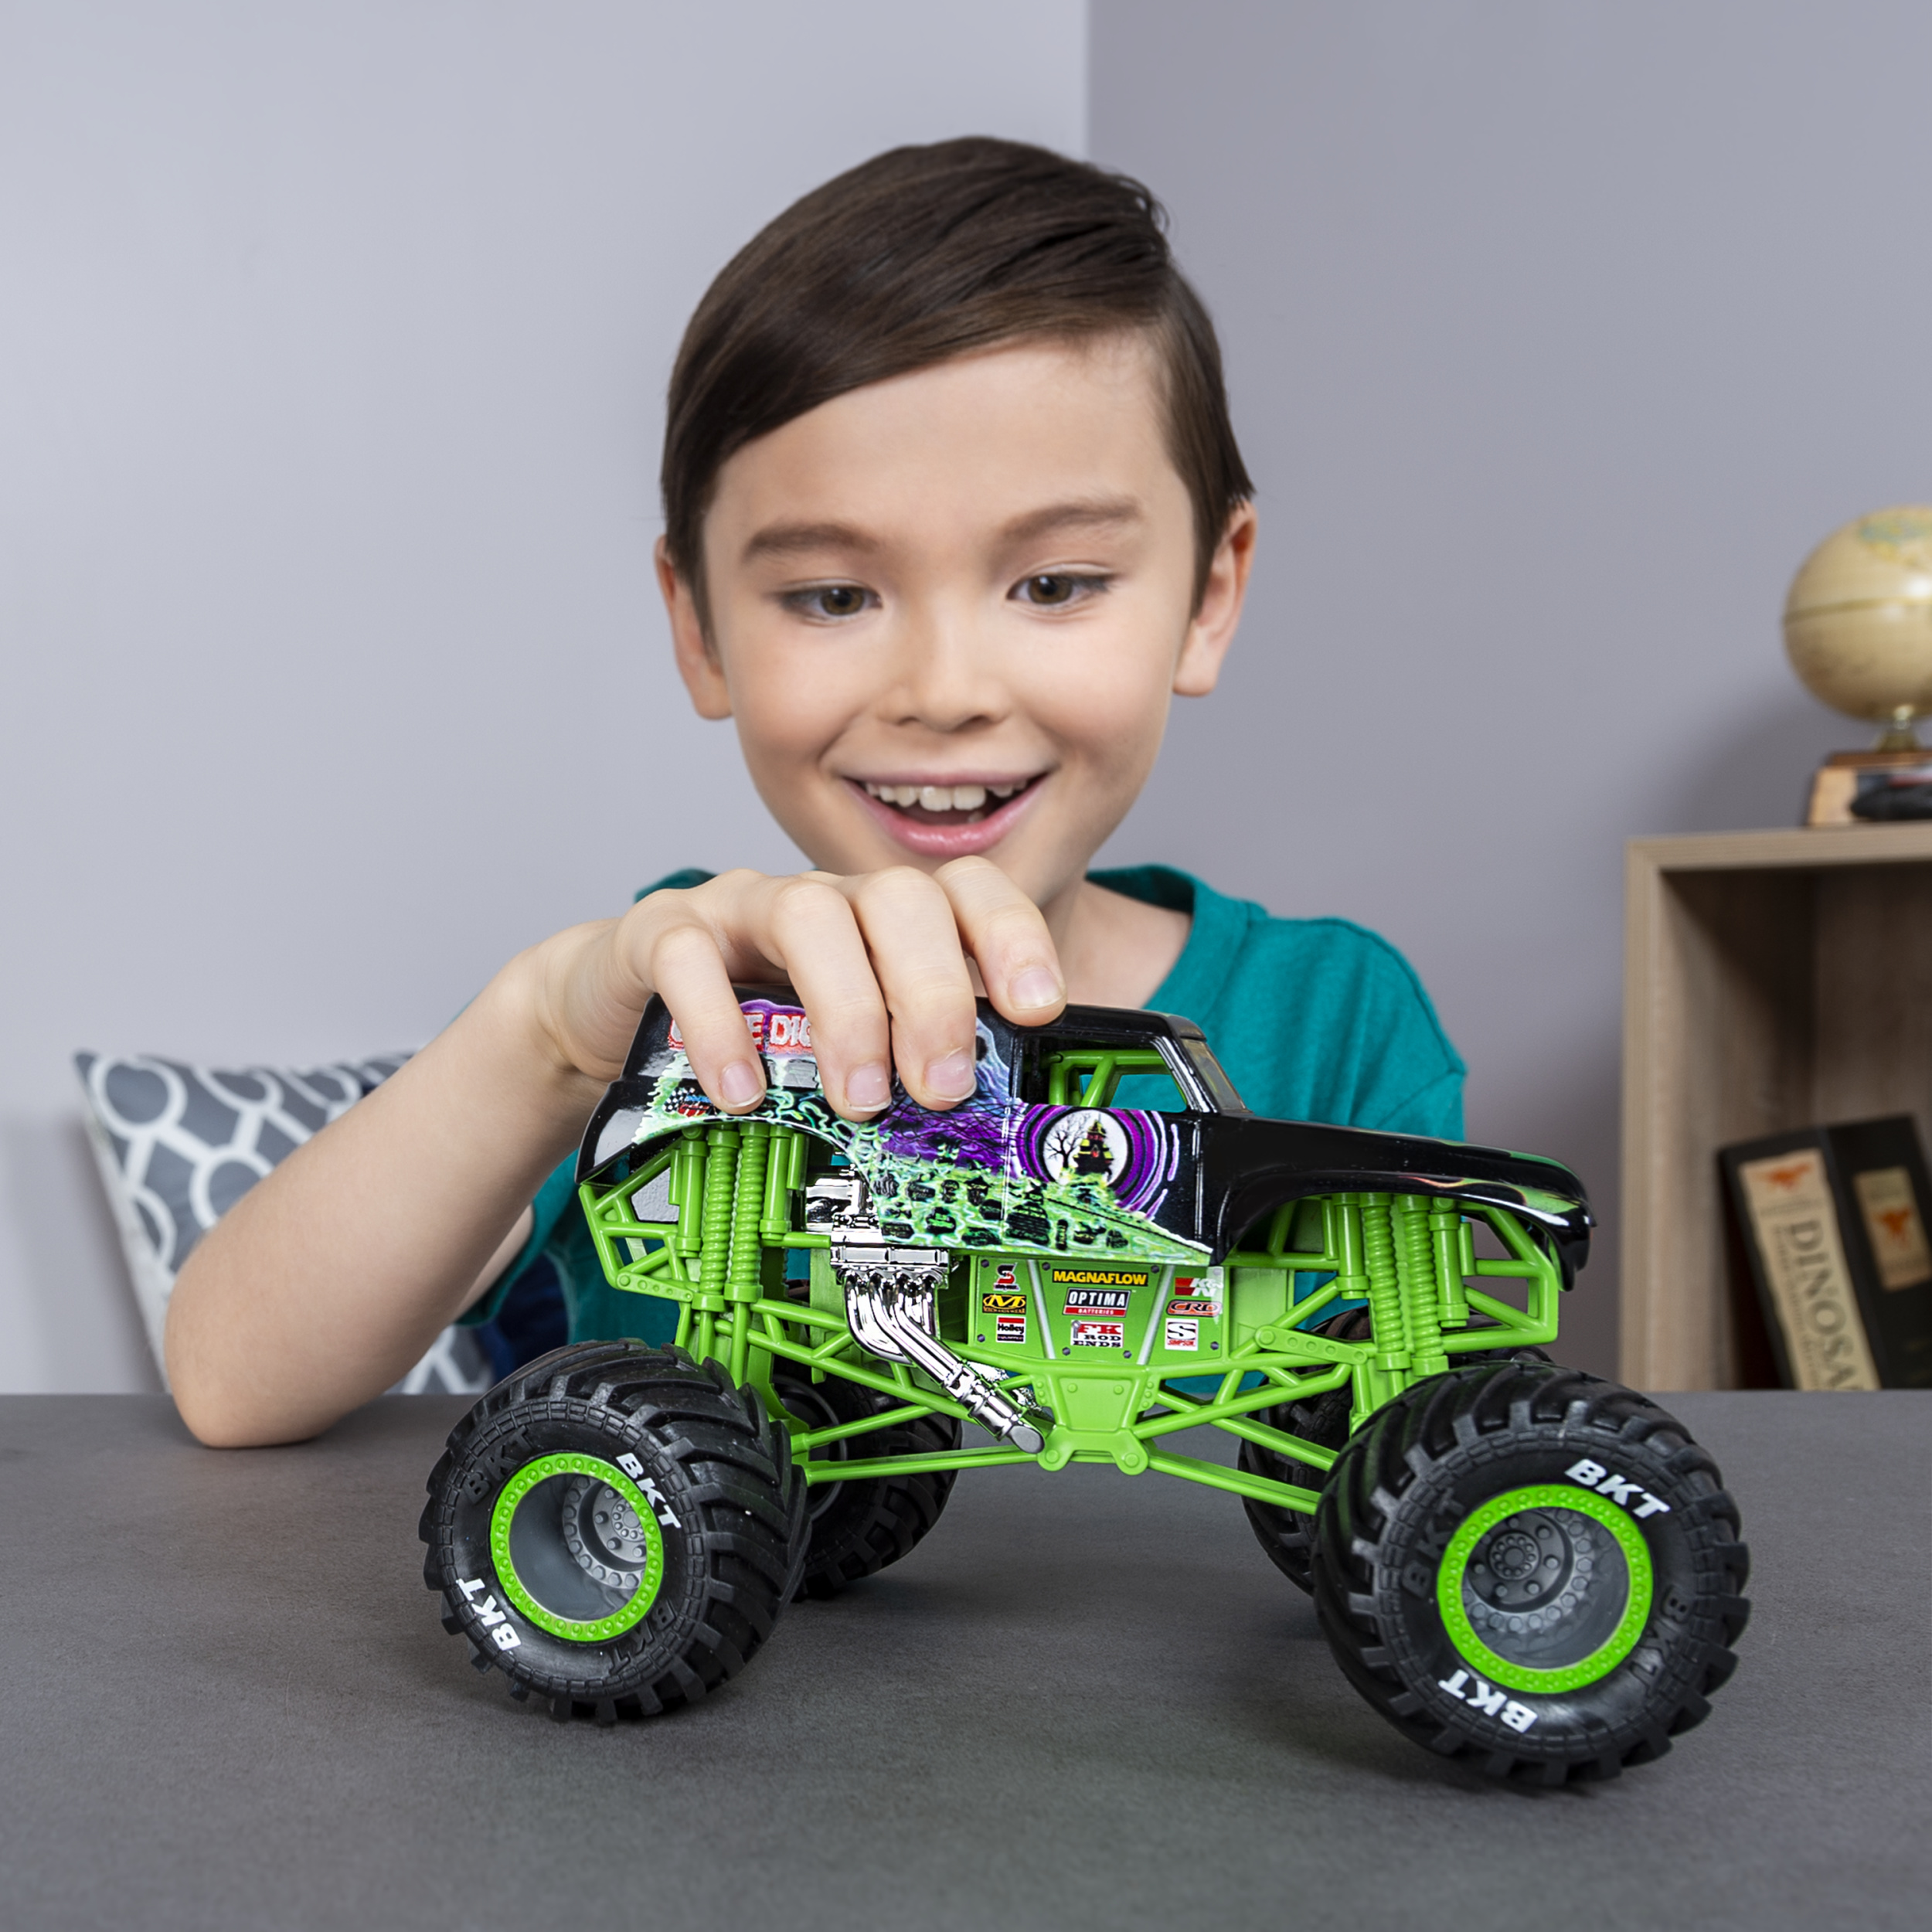 Monster Jam, Official Grave Digger Monster Truck, Die-Cast Vehicle, 1:24 Scale - image 2 of 5